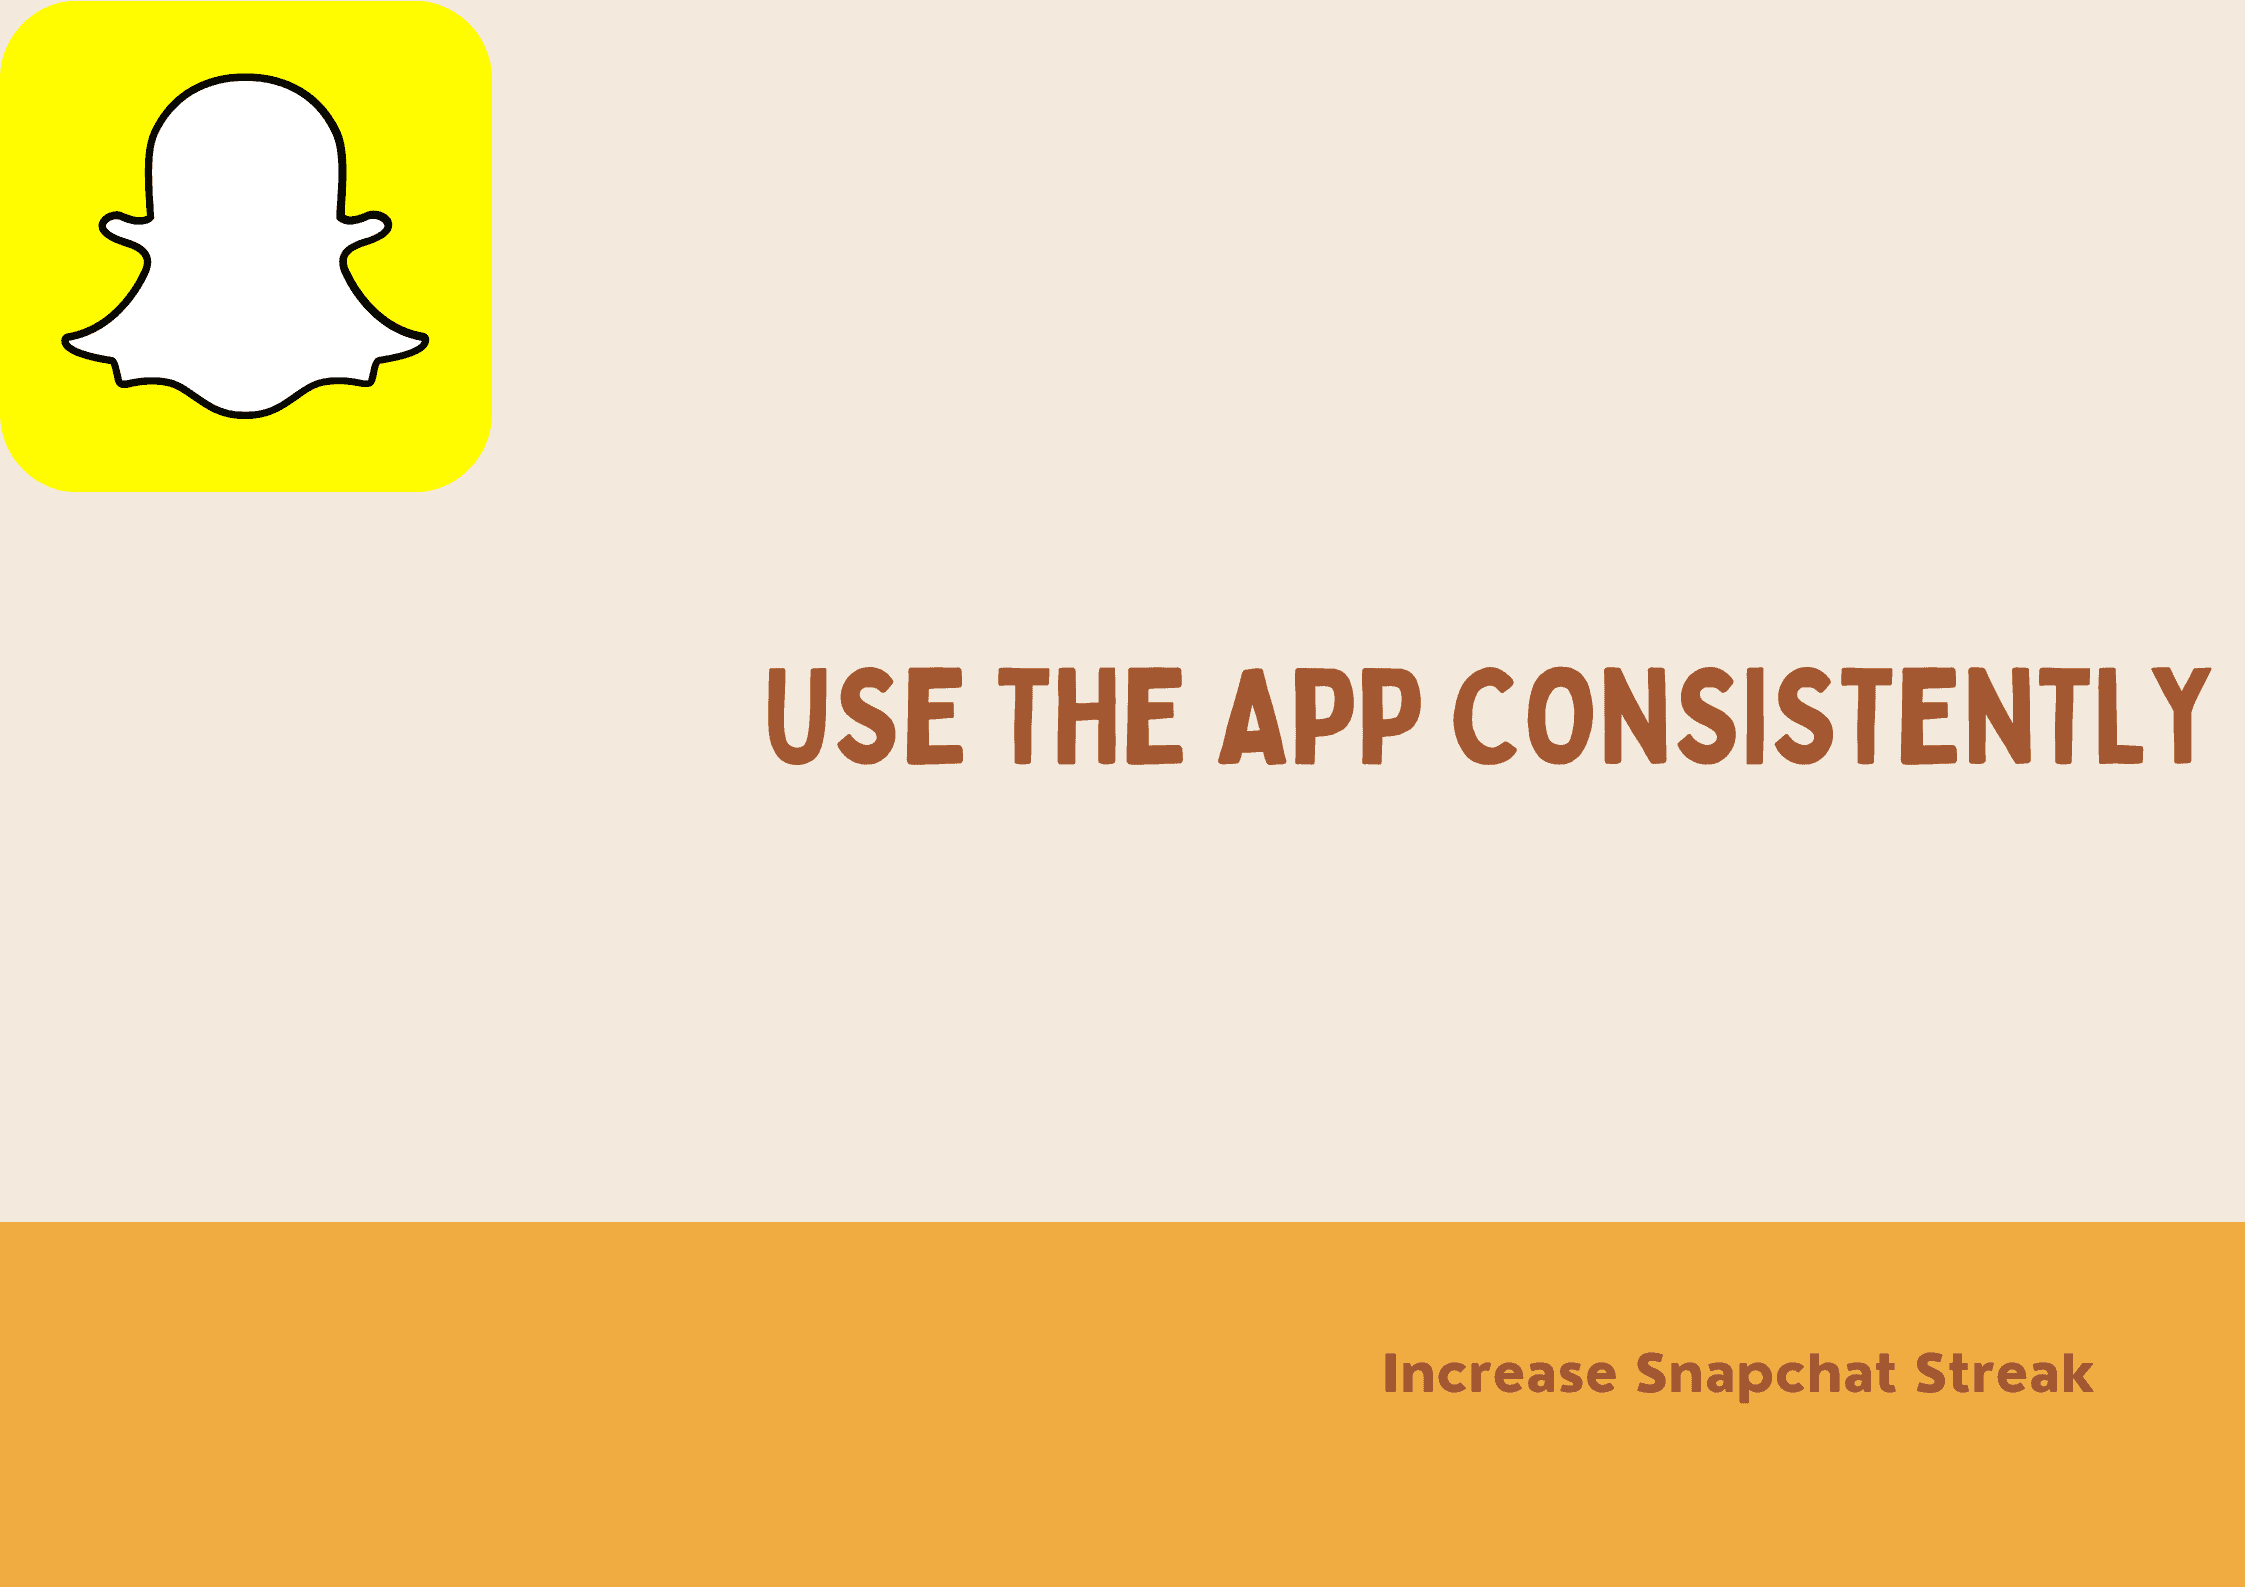 Use the app consistently